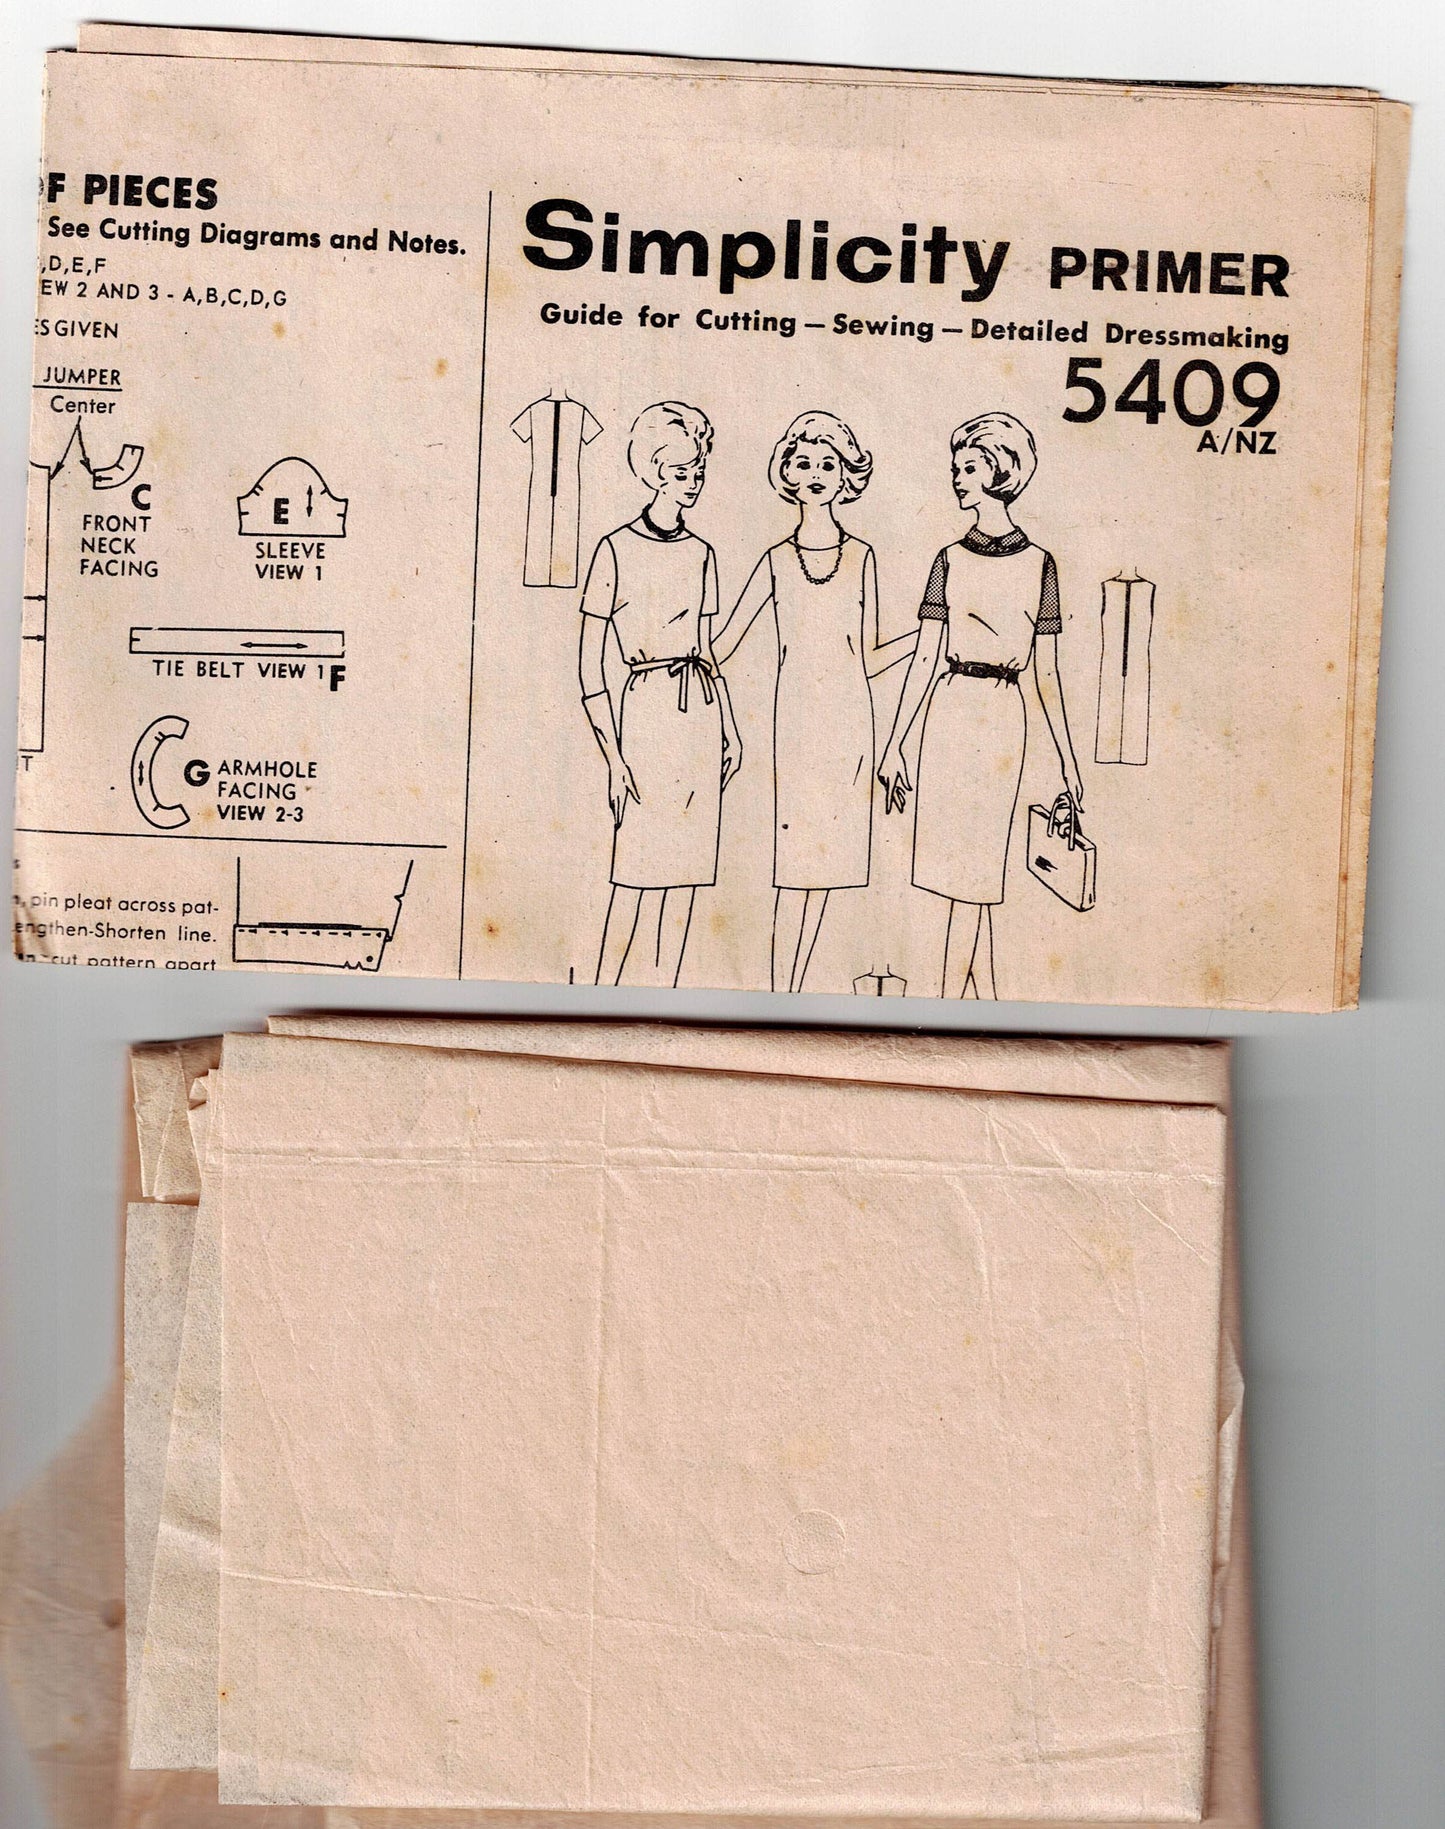 Simplicity 5409 Womens Half Size Slim Shift Dress or Jumper 1960s Vintage Sewing Pattern Size 14 1/2 Bust 35 inches